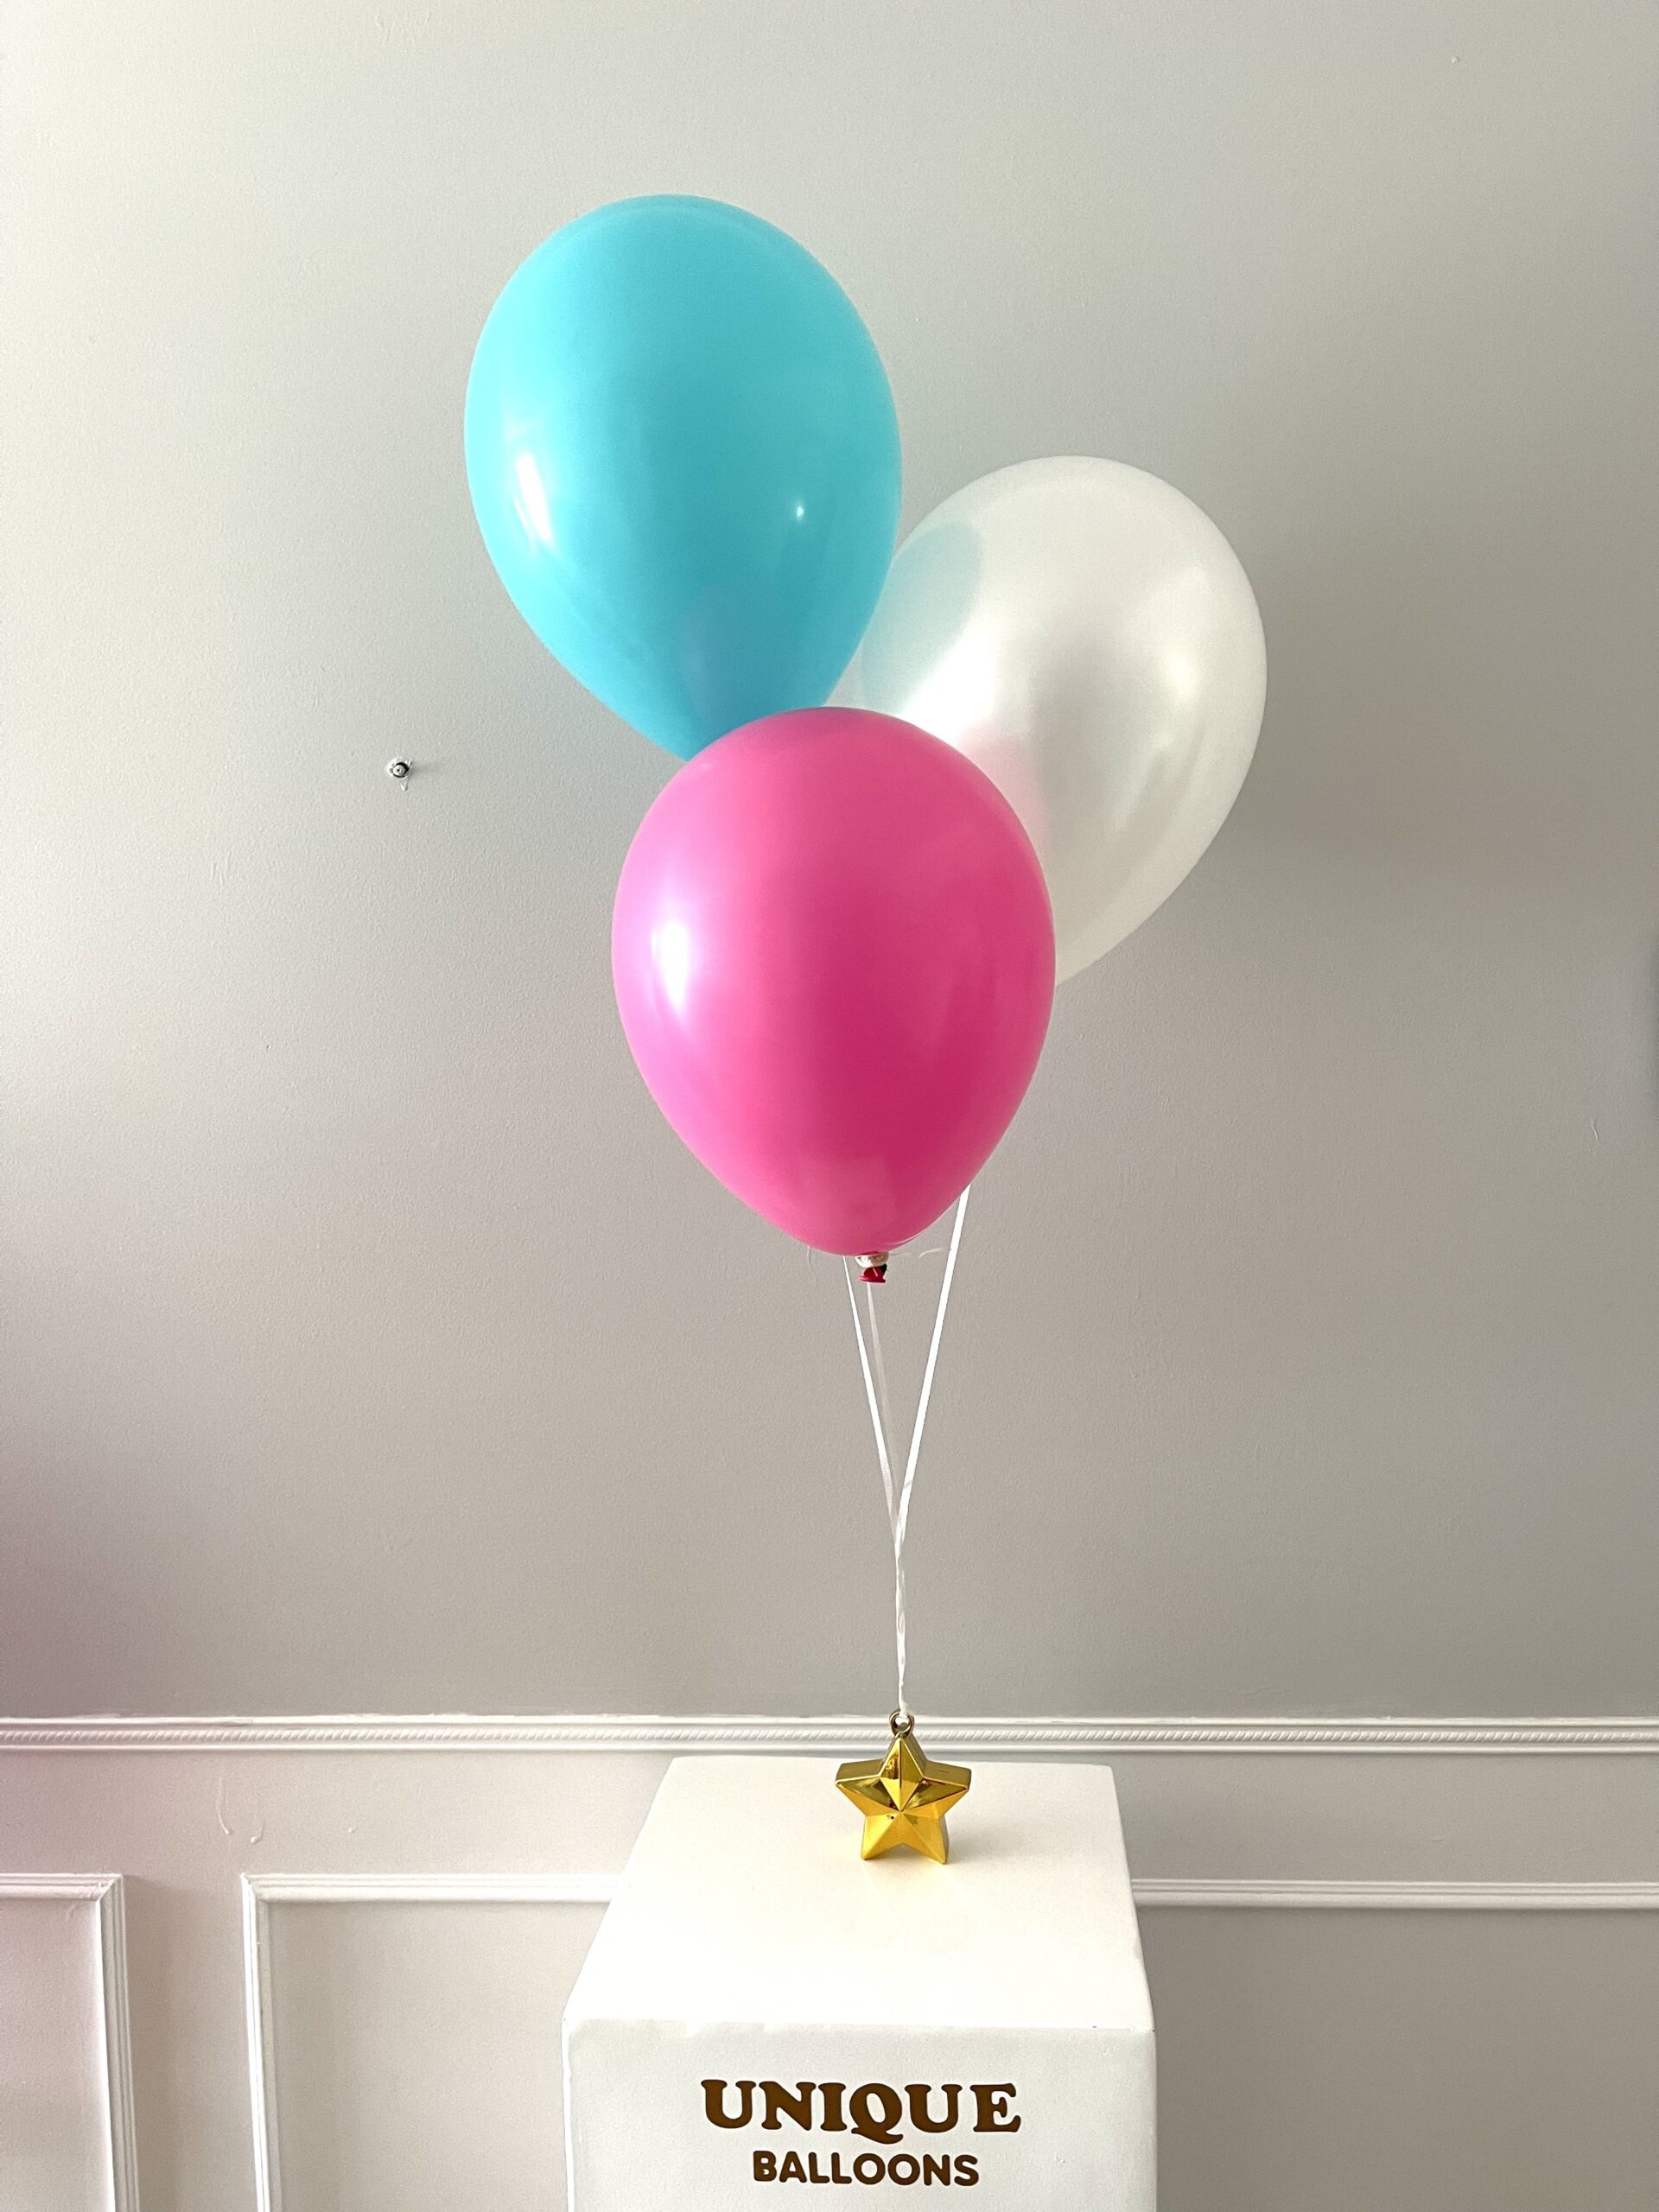 Price guide – Unique Balloons Delivered Sydney